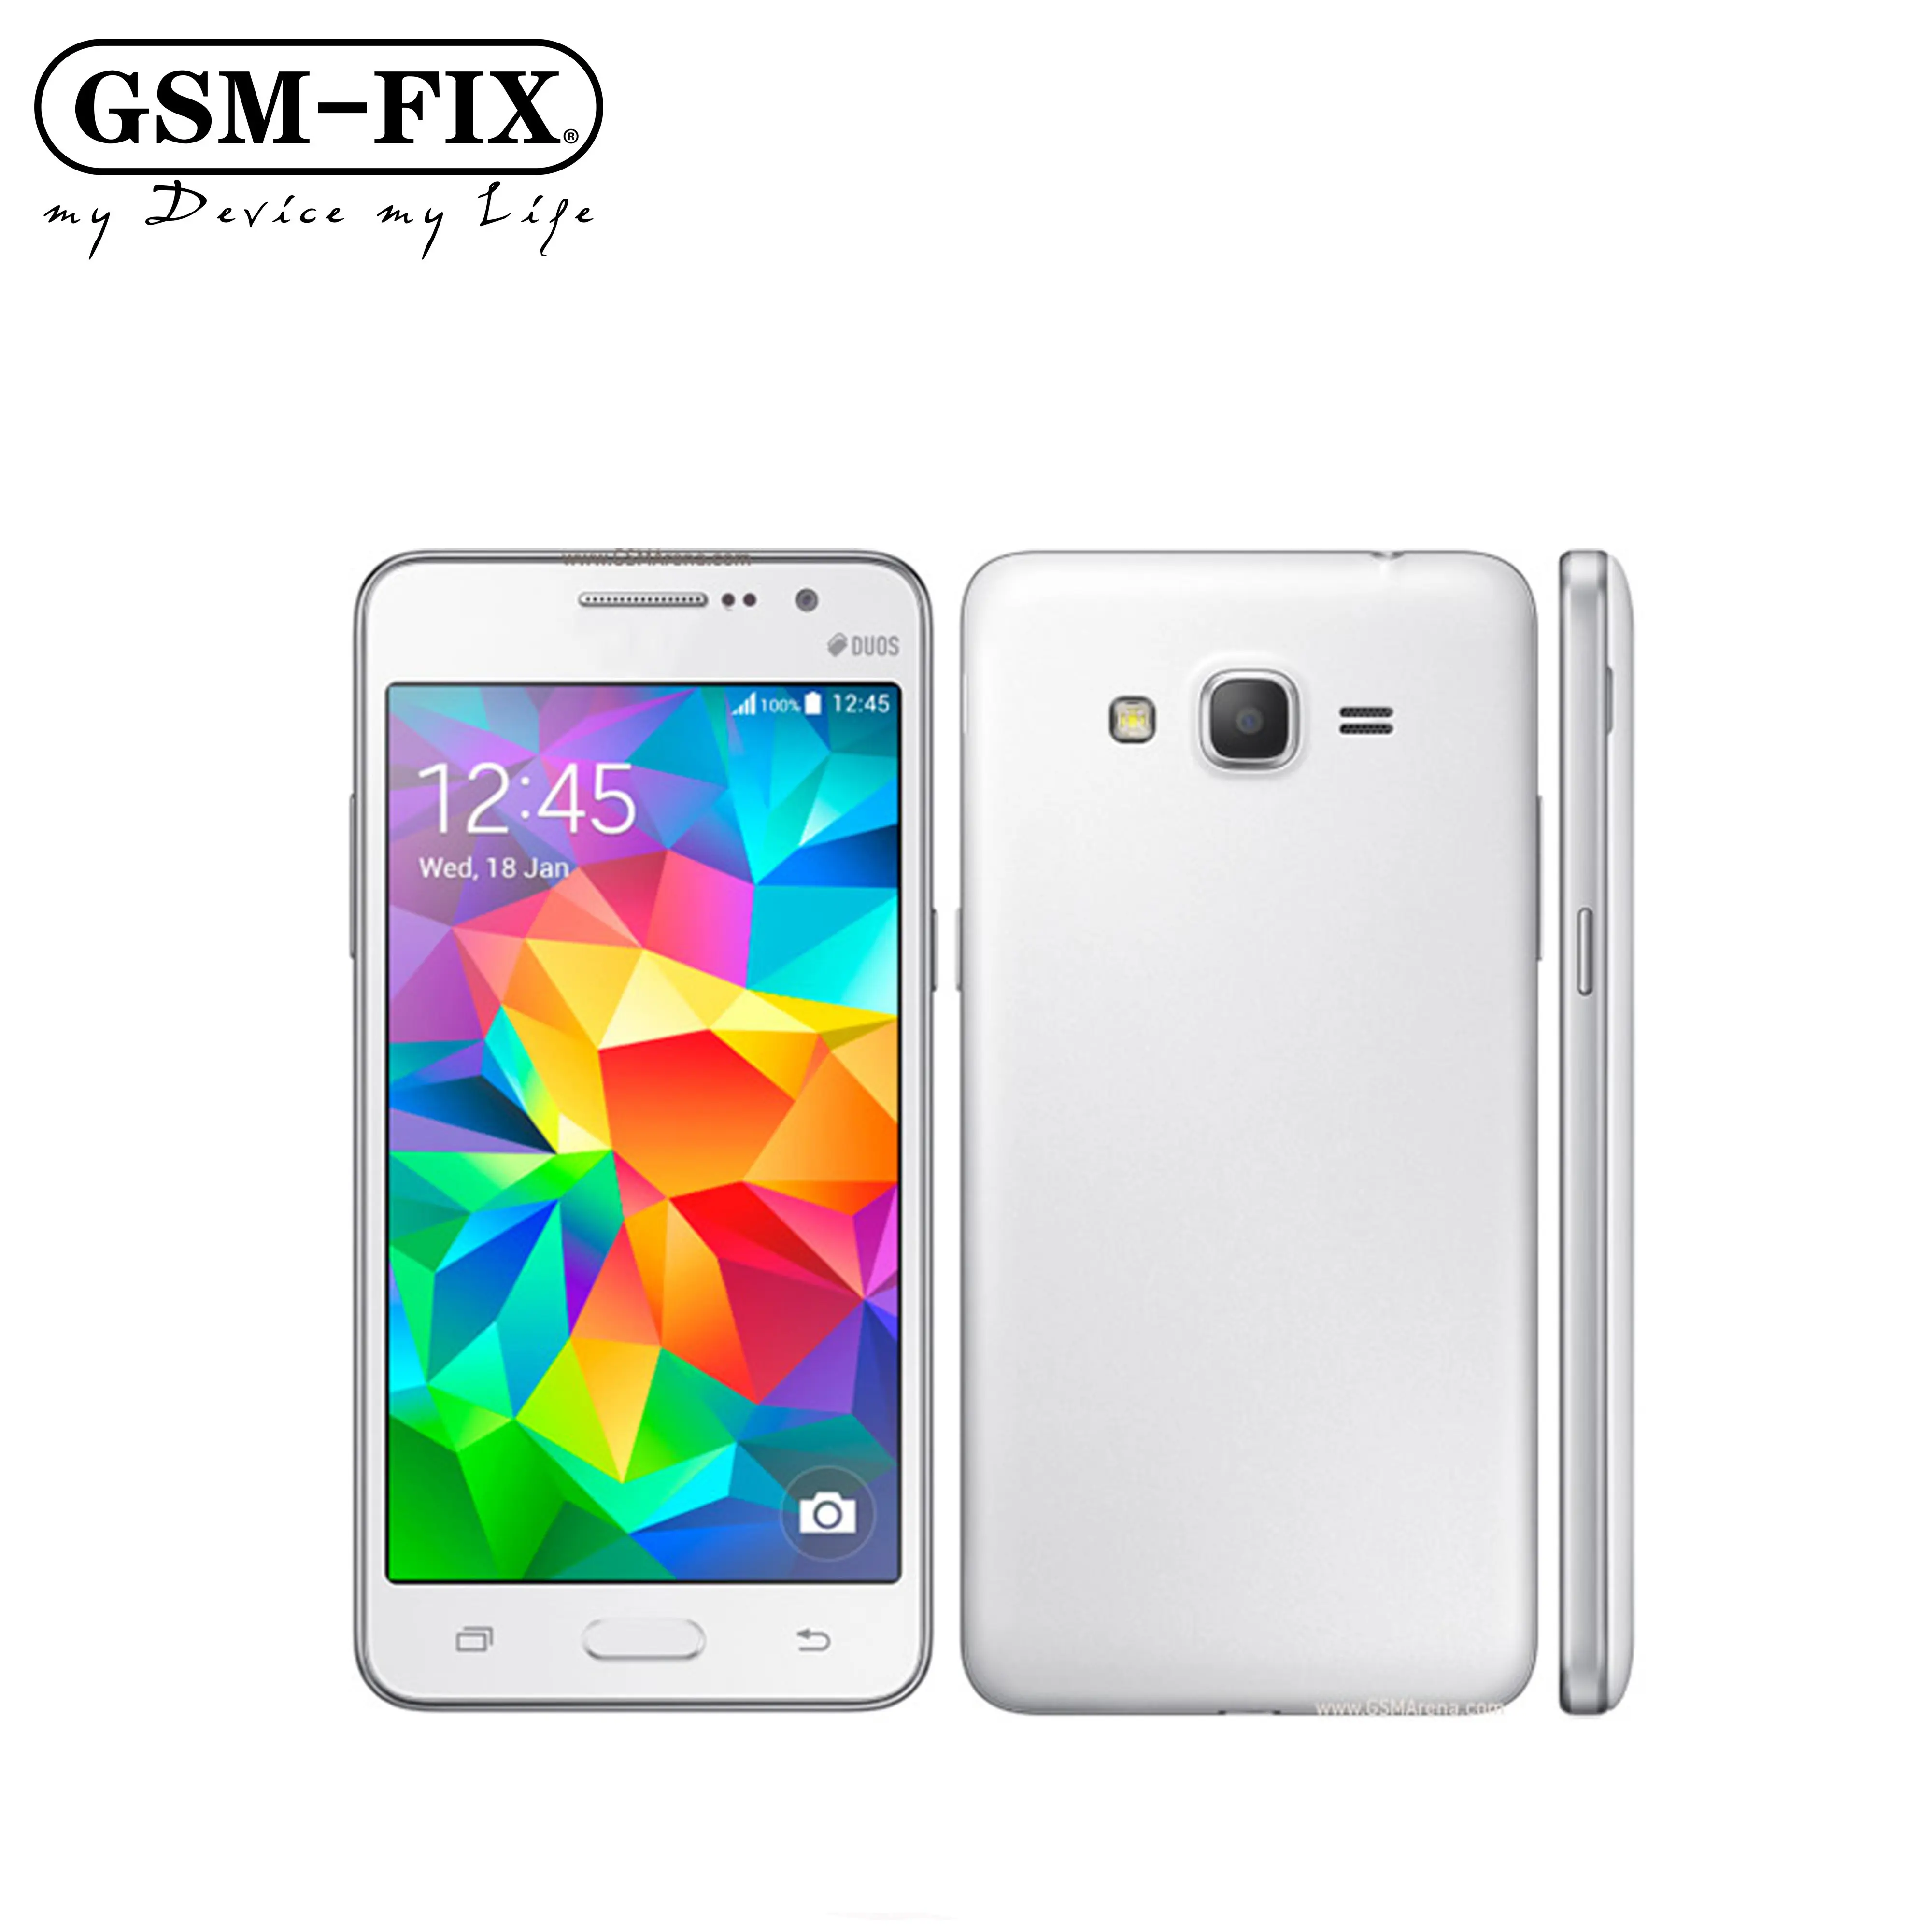 GSM-FIX Unlocked Original For Samsung Galaxy Grand Prime G530 G530H Cell Phone Ouad Core Dual Sim 1GB RAM 5.0 Inch Touch Screen